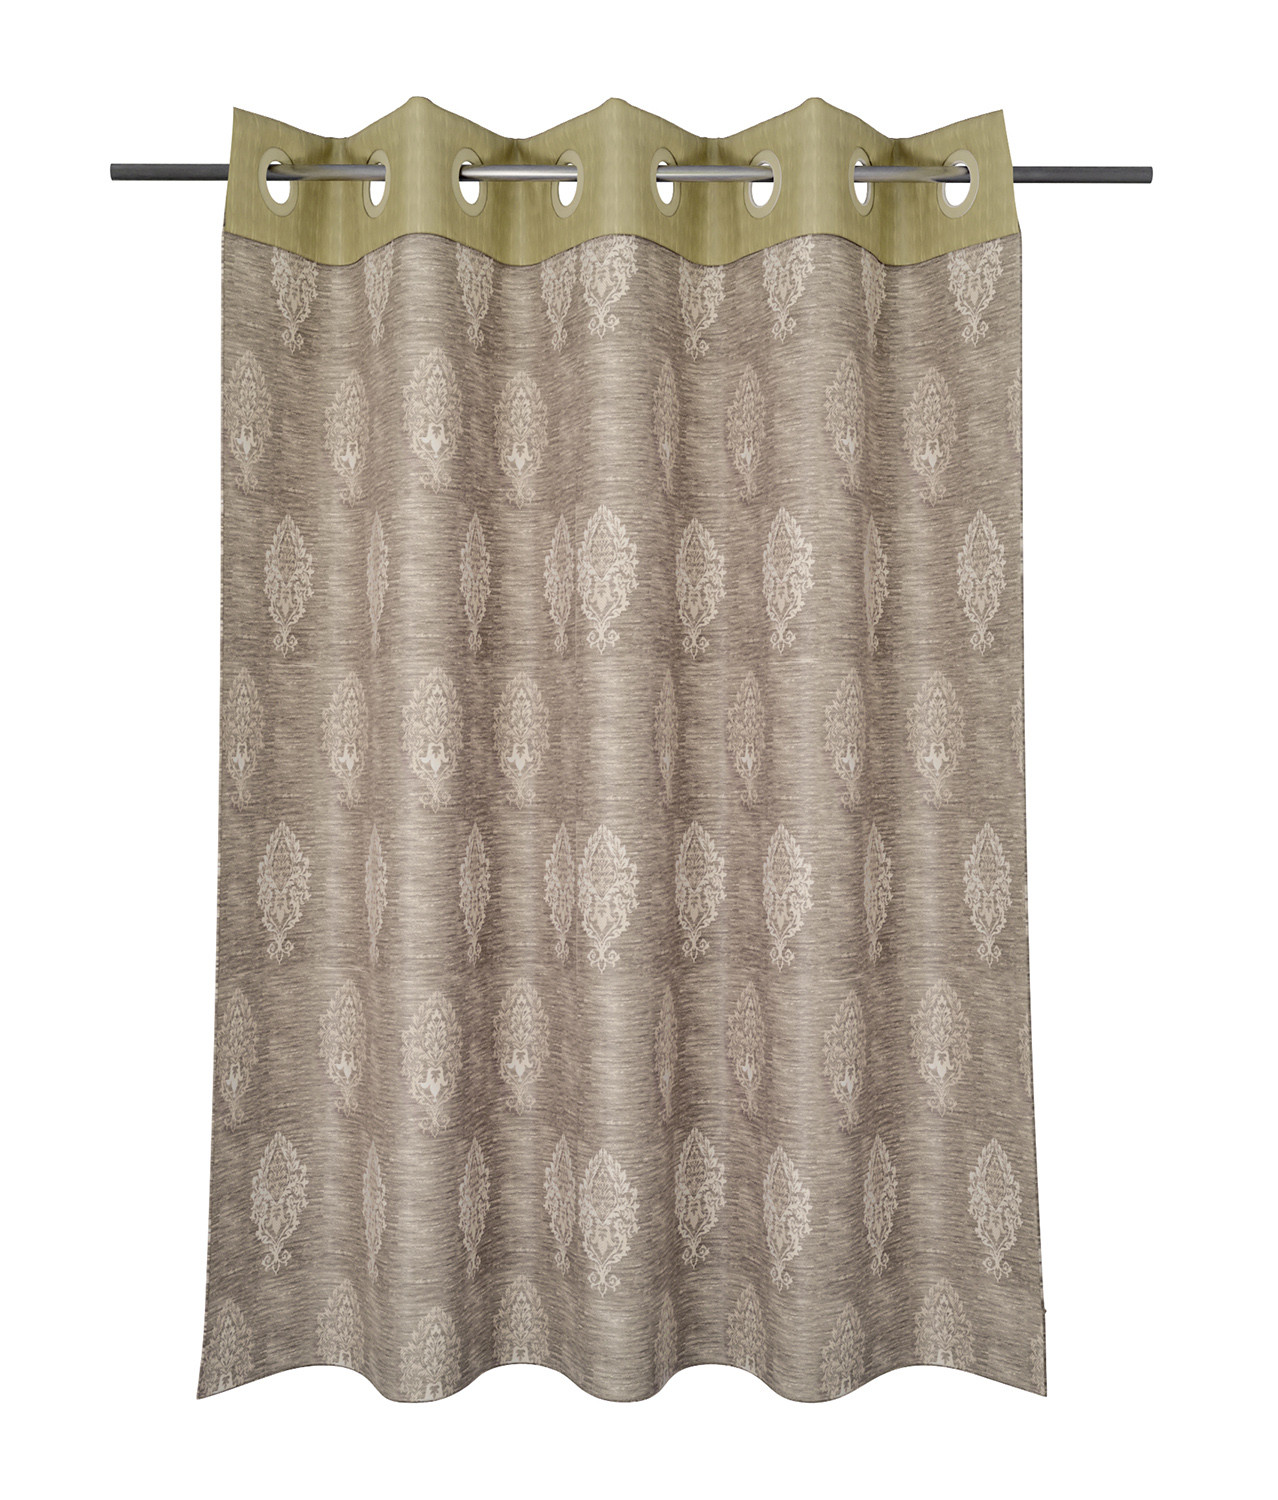 Kuber Industries Faux Silk Decorative 9 Feet Long Door Curtain | Damask Print Blackout Drapes Curtain With 8 Eyelet For Home & Office (Cream)